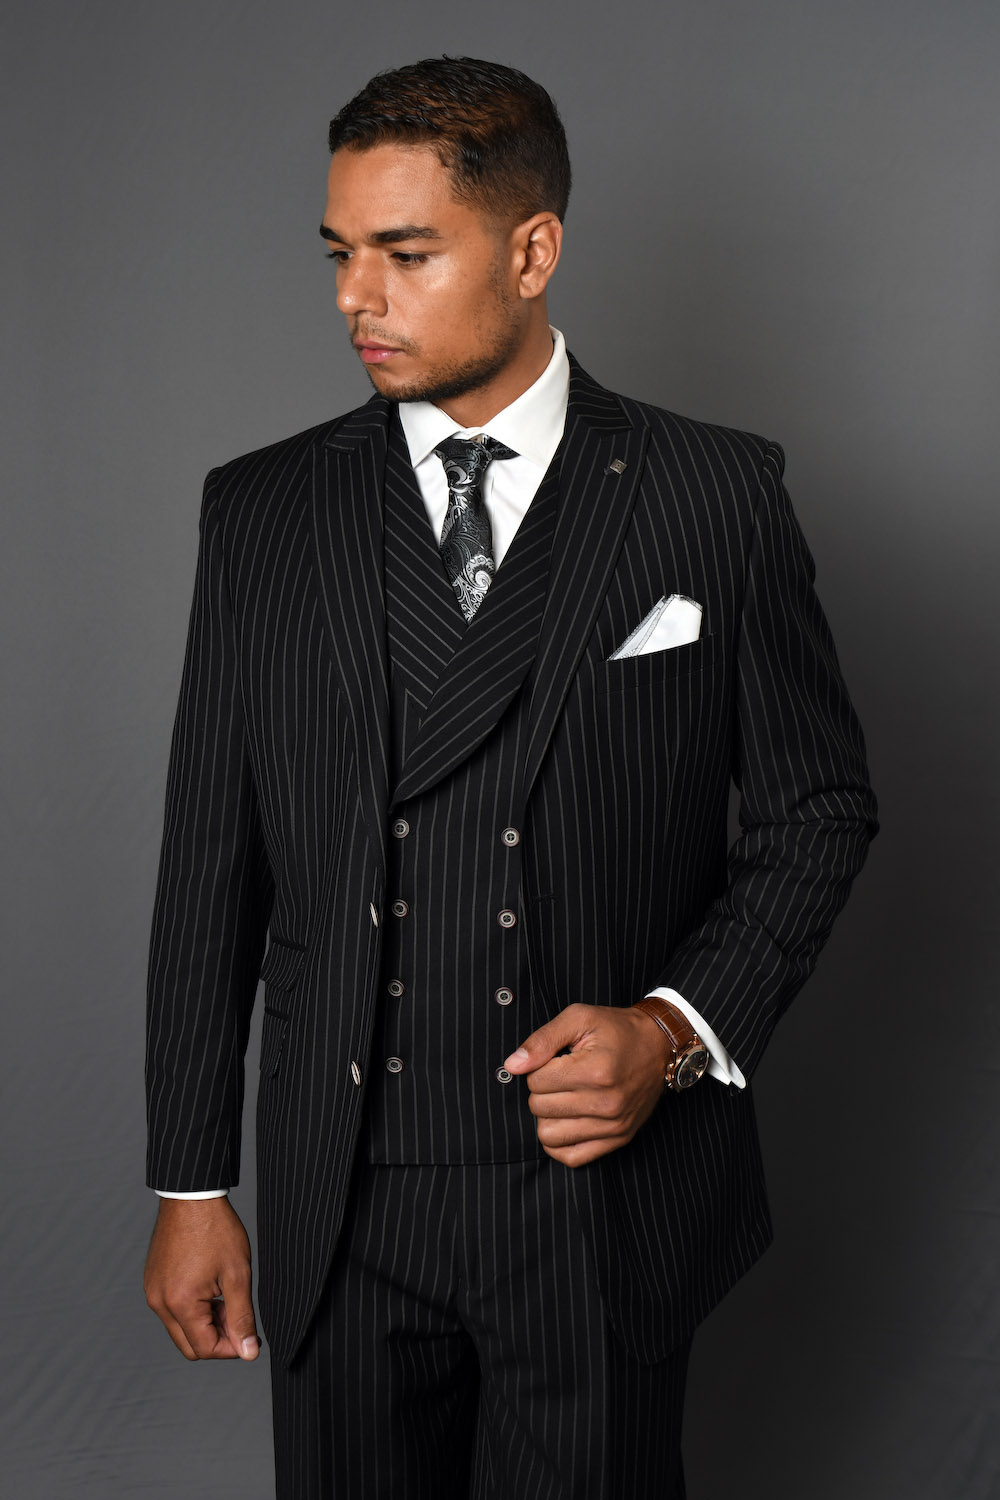 ZARELLI  BLACK GREY 3PC 2 BUTTON PINSTRIPE, DOUBLE BREASTED VEST, PLEATED PANTS SUPER 150'S WOOL SUIT EXTRA FINE ITALIAN MADE  